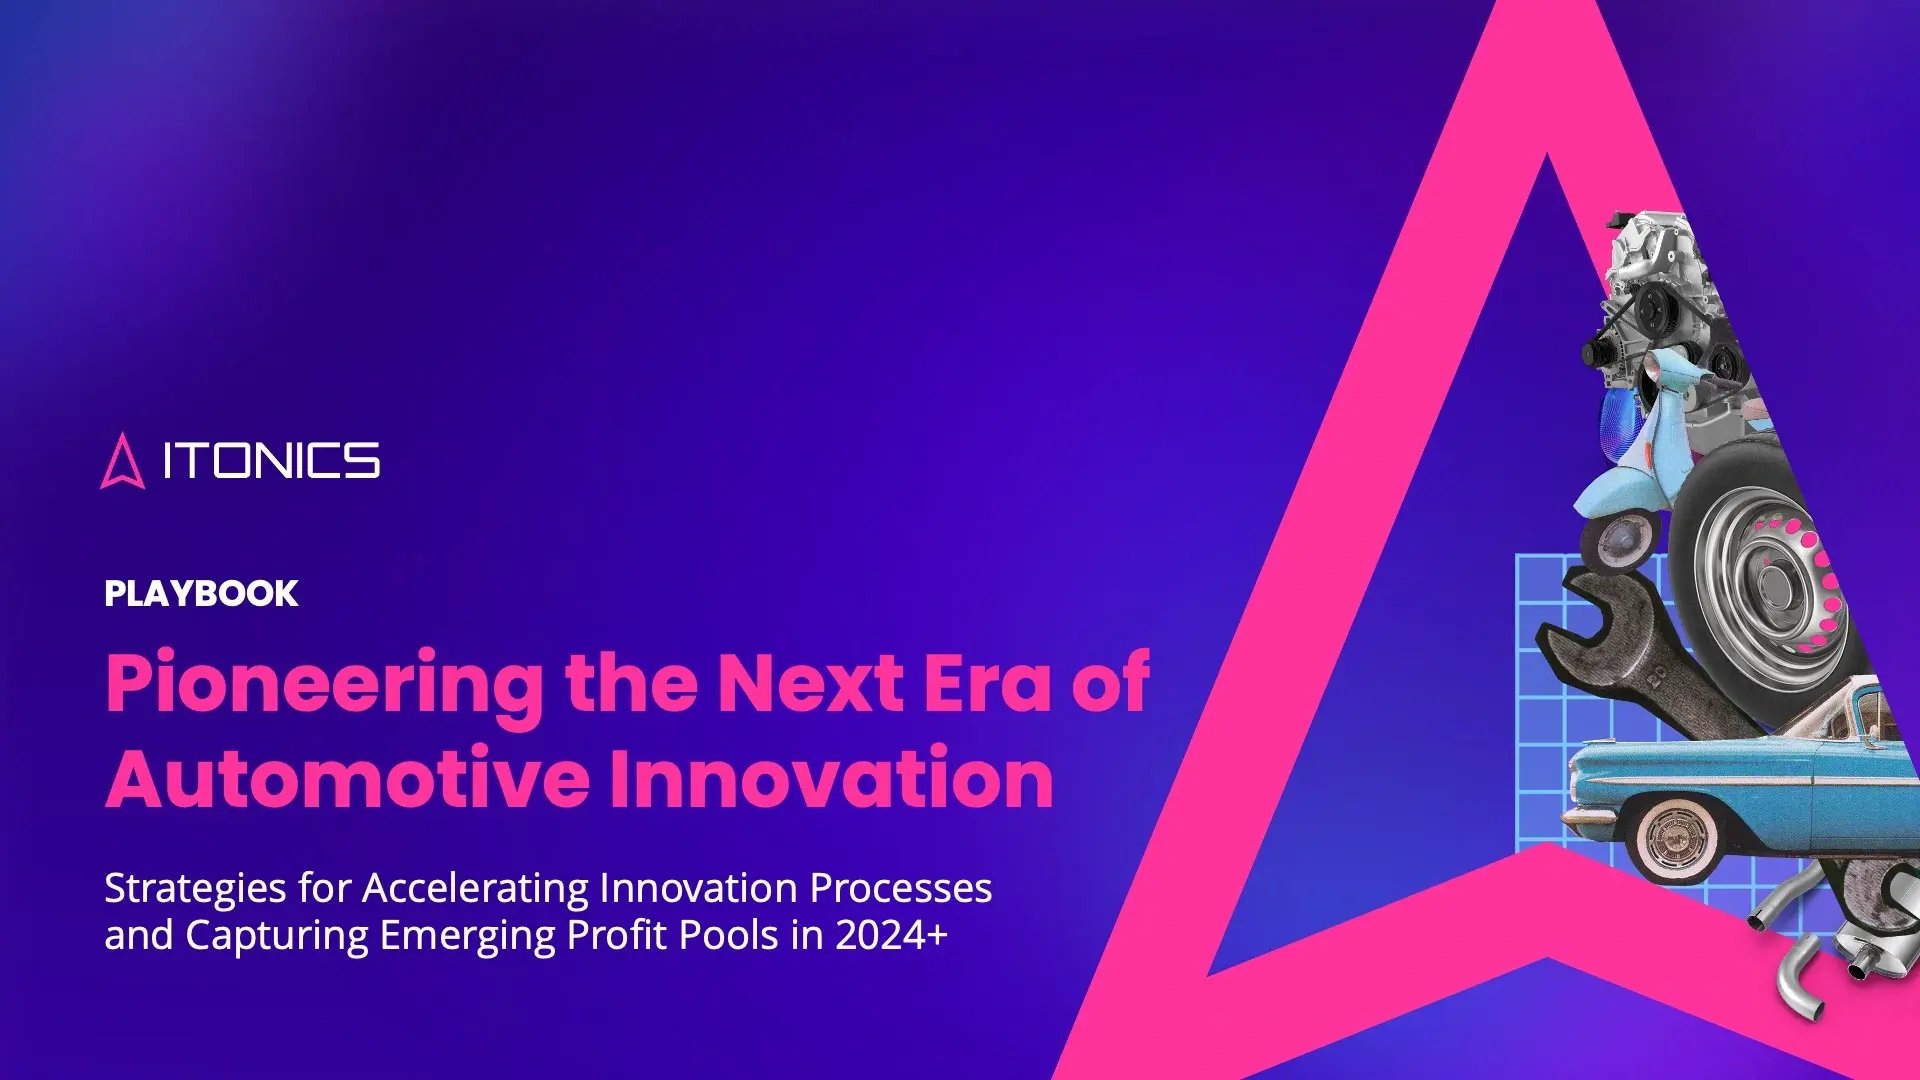 Playbook for Pioneering the Next Era of Automotive Innovation